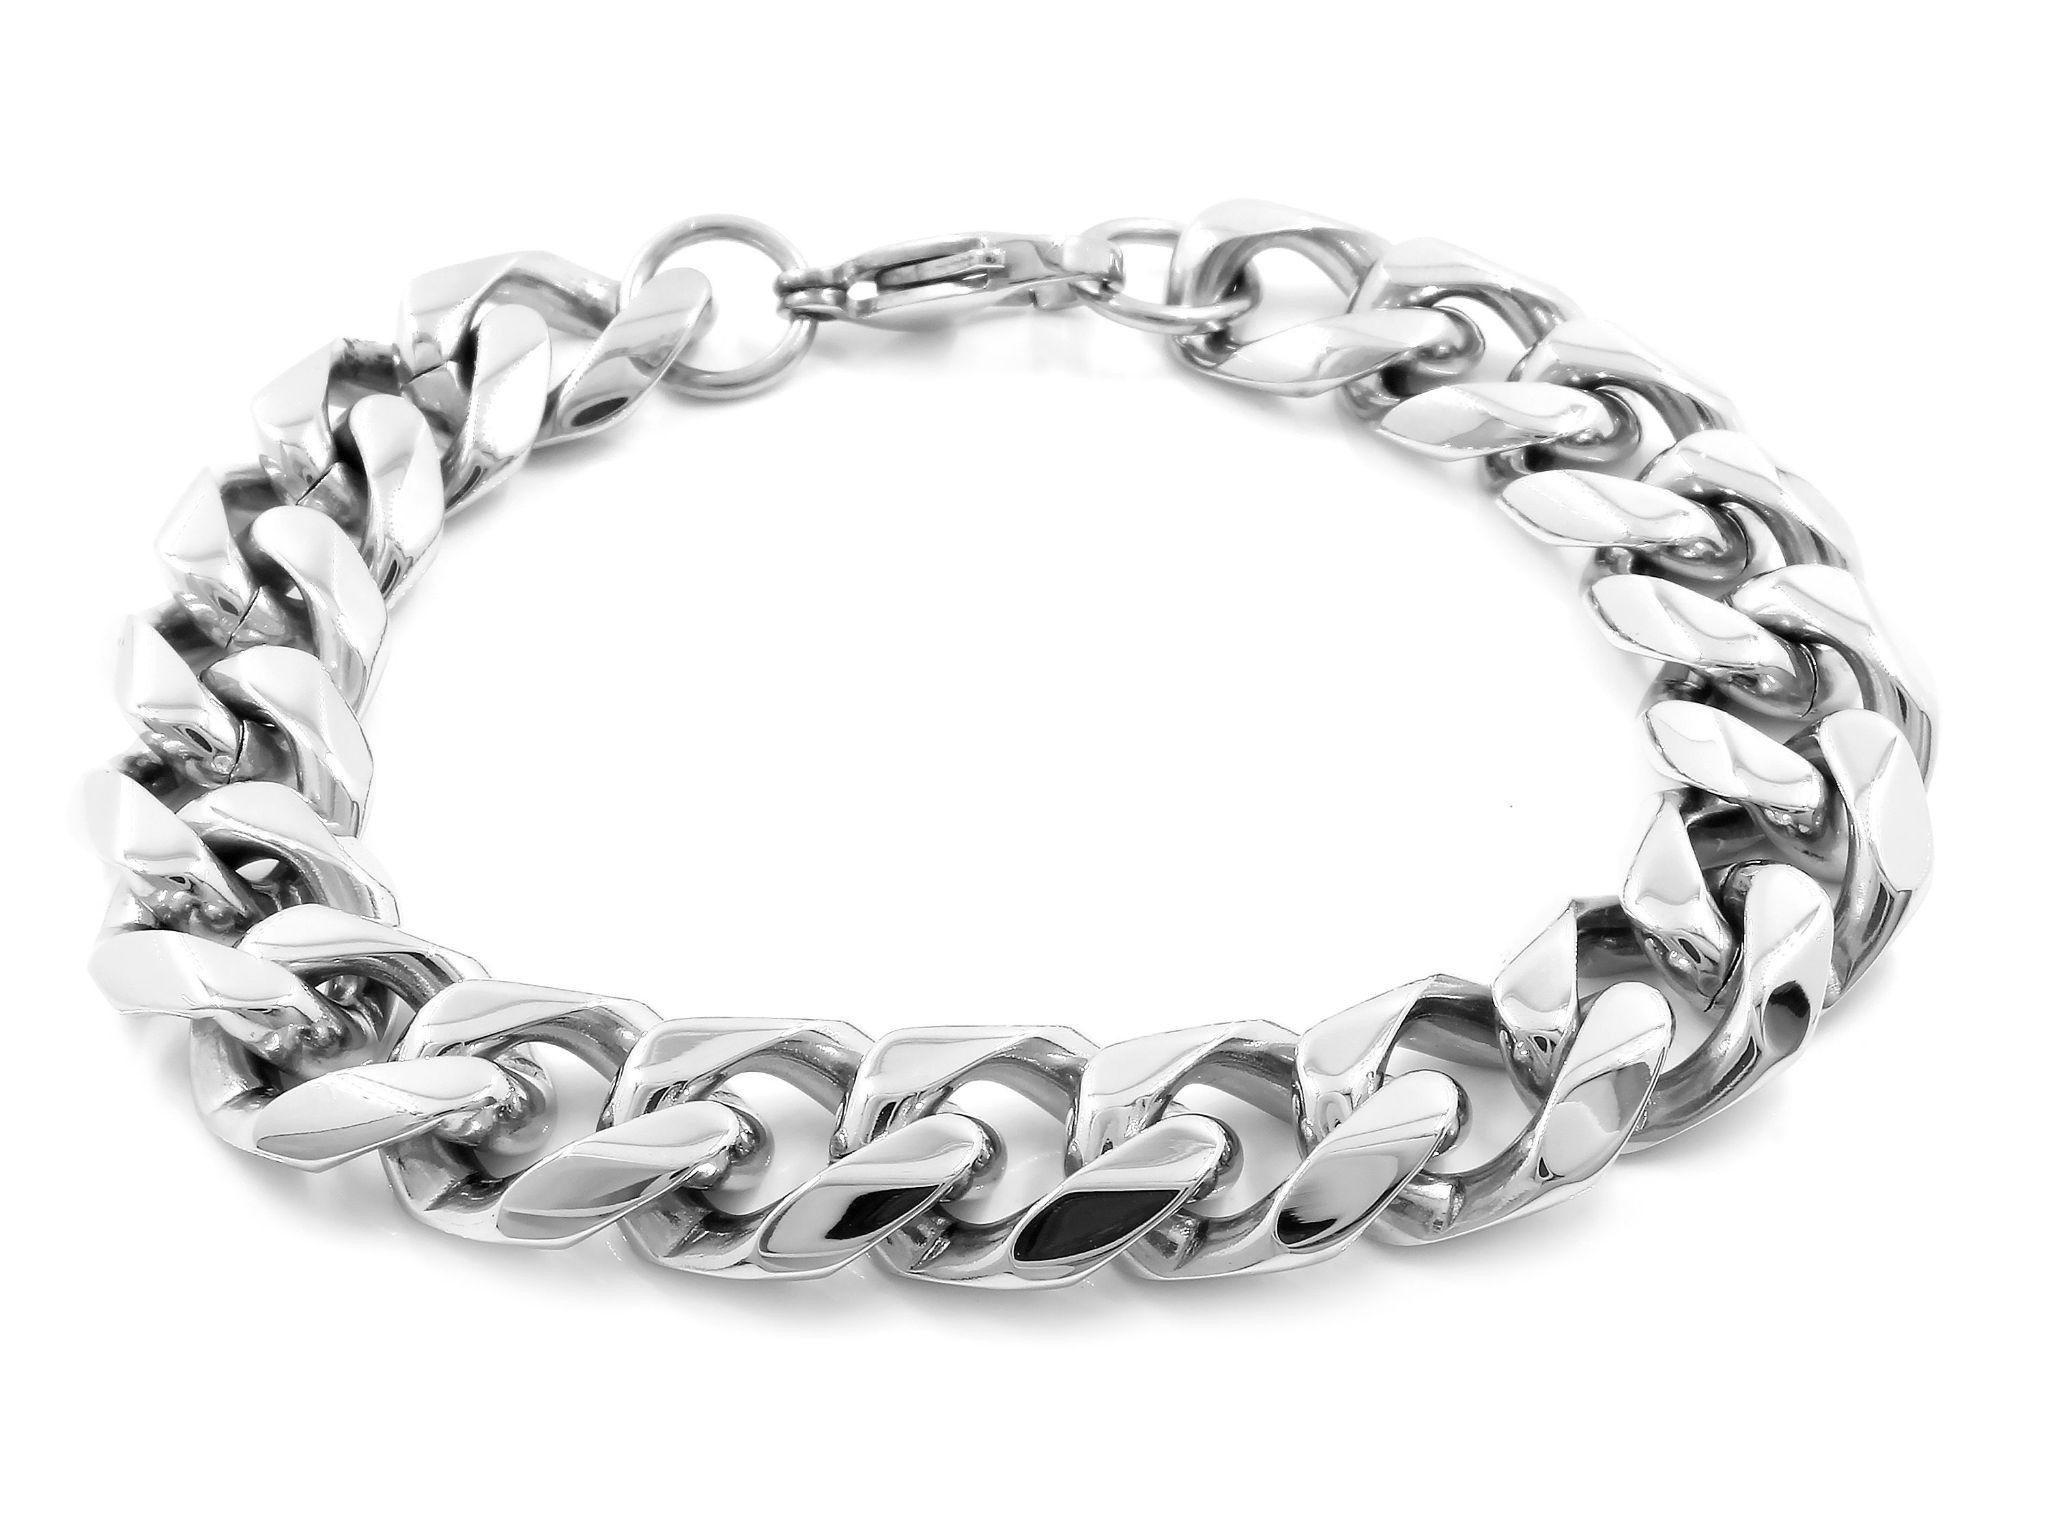 Stainless Steel Jewelry: The Perfect Blend of Style and Durability